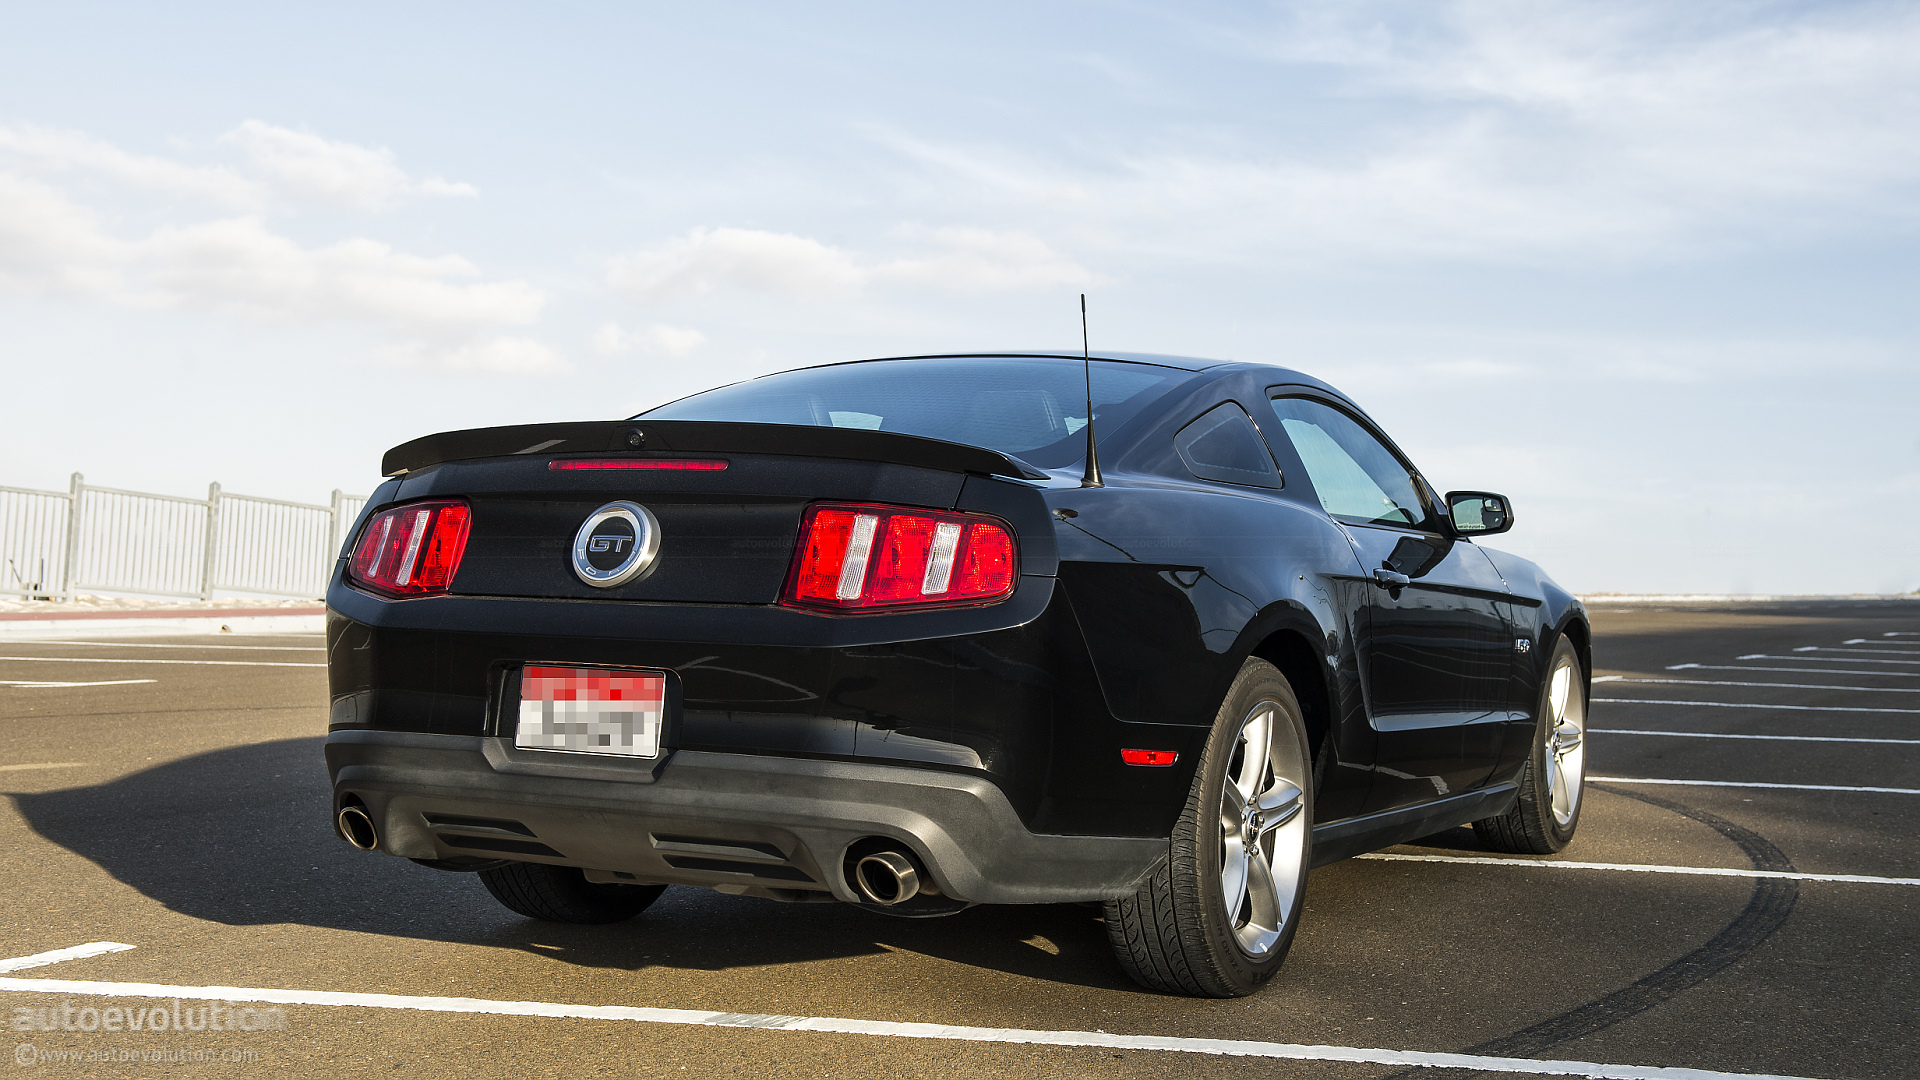 2012 Ford mustang gt test drive #1